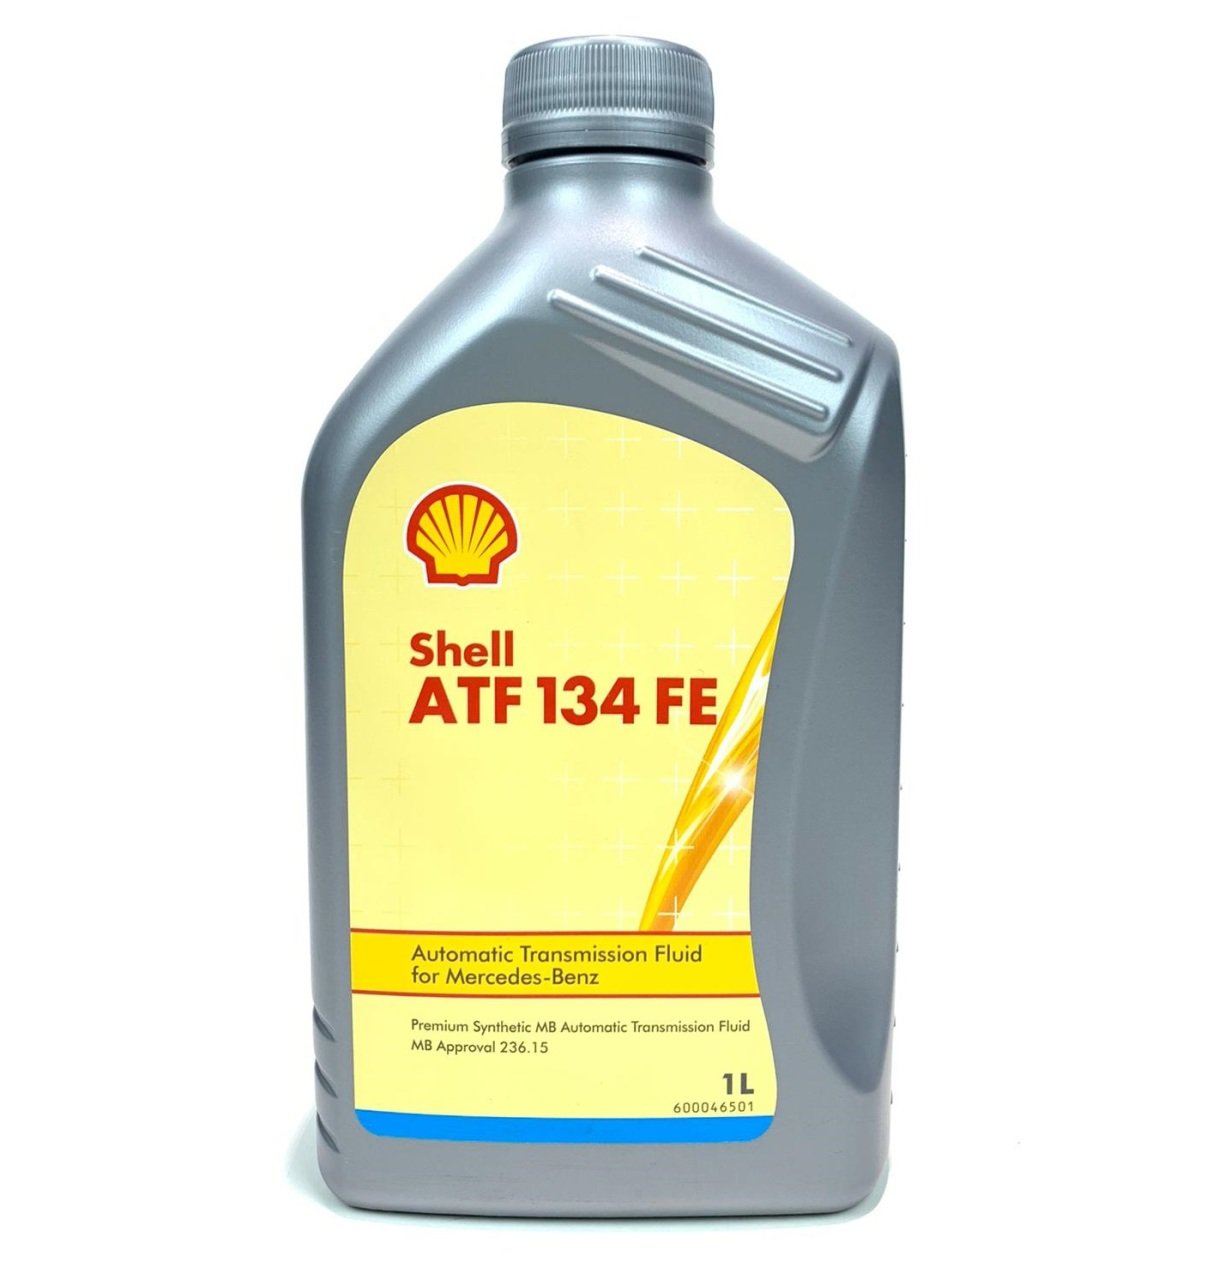 Atf 134. Atf134fe. ATF 134 Mercedes. Shell_ATF 3403 M-115_20л. Shell ATF 3403 M-115.